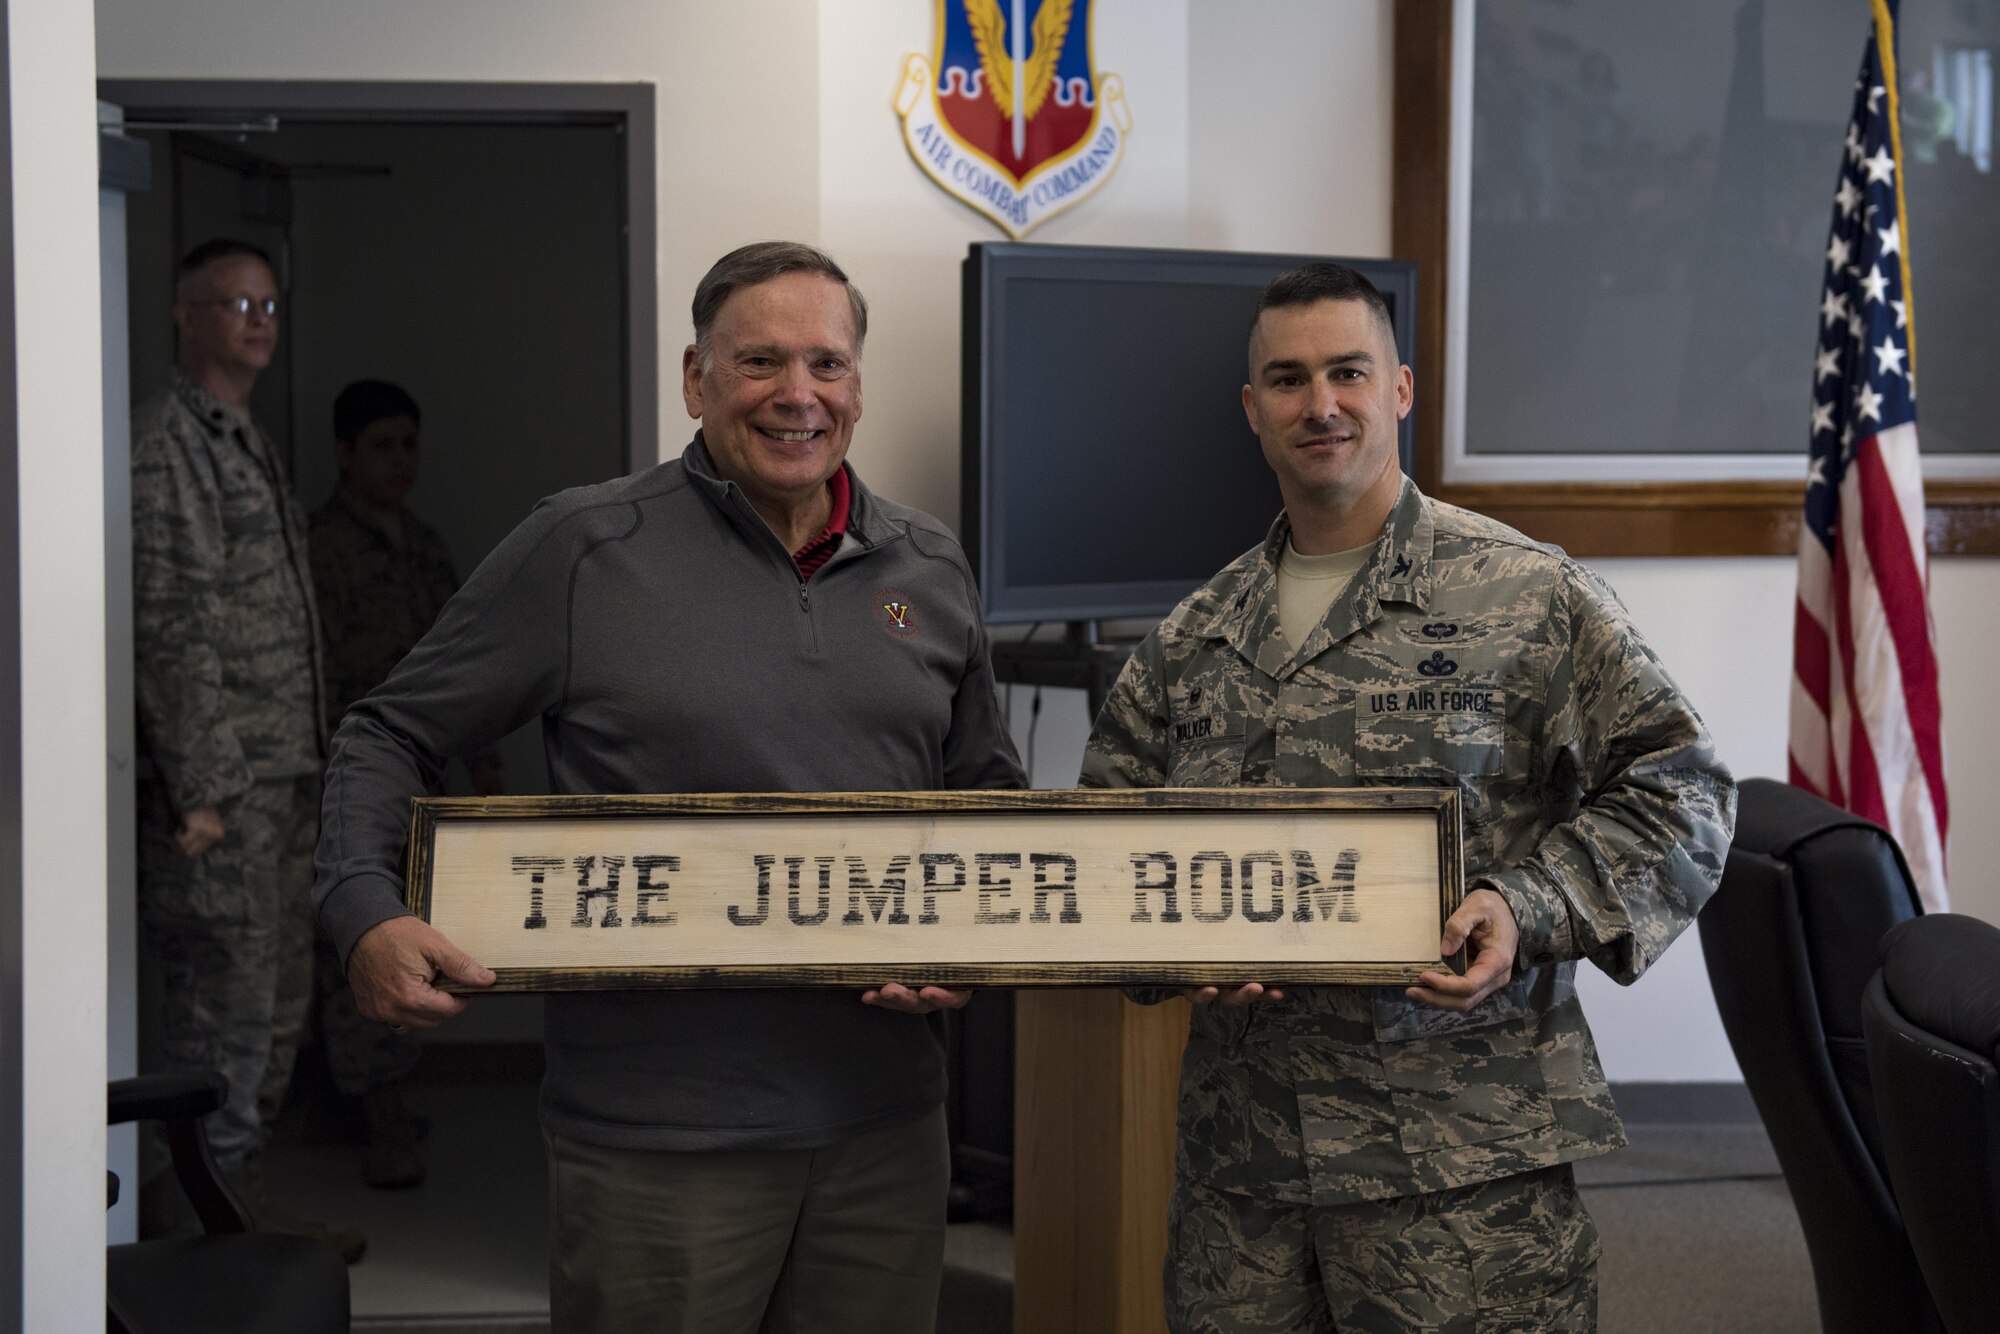 Retired chief of staff Gen. John Jumper, left, and Col. Kevin Walker, 820th Base Defense Group commander, pose for a photo after dedicating a conference room to Jumper during the 820th Base Defense Group’s 20th Anniversary Ceremony, March 28, 2017, at Moody Air Force Base, Ga. Jumper was a command pilot with more than 5,000 flying hours, including 1,400 combat hours. The celebration included an 820th BDG capabilities demo, a reenlistment ceremony and a formal dinner. (U.S. Air Force photo by Airman 1st Class Daniel Snider)